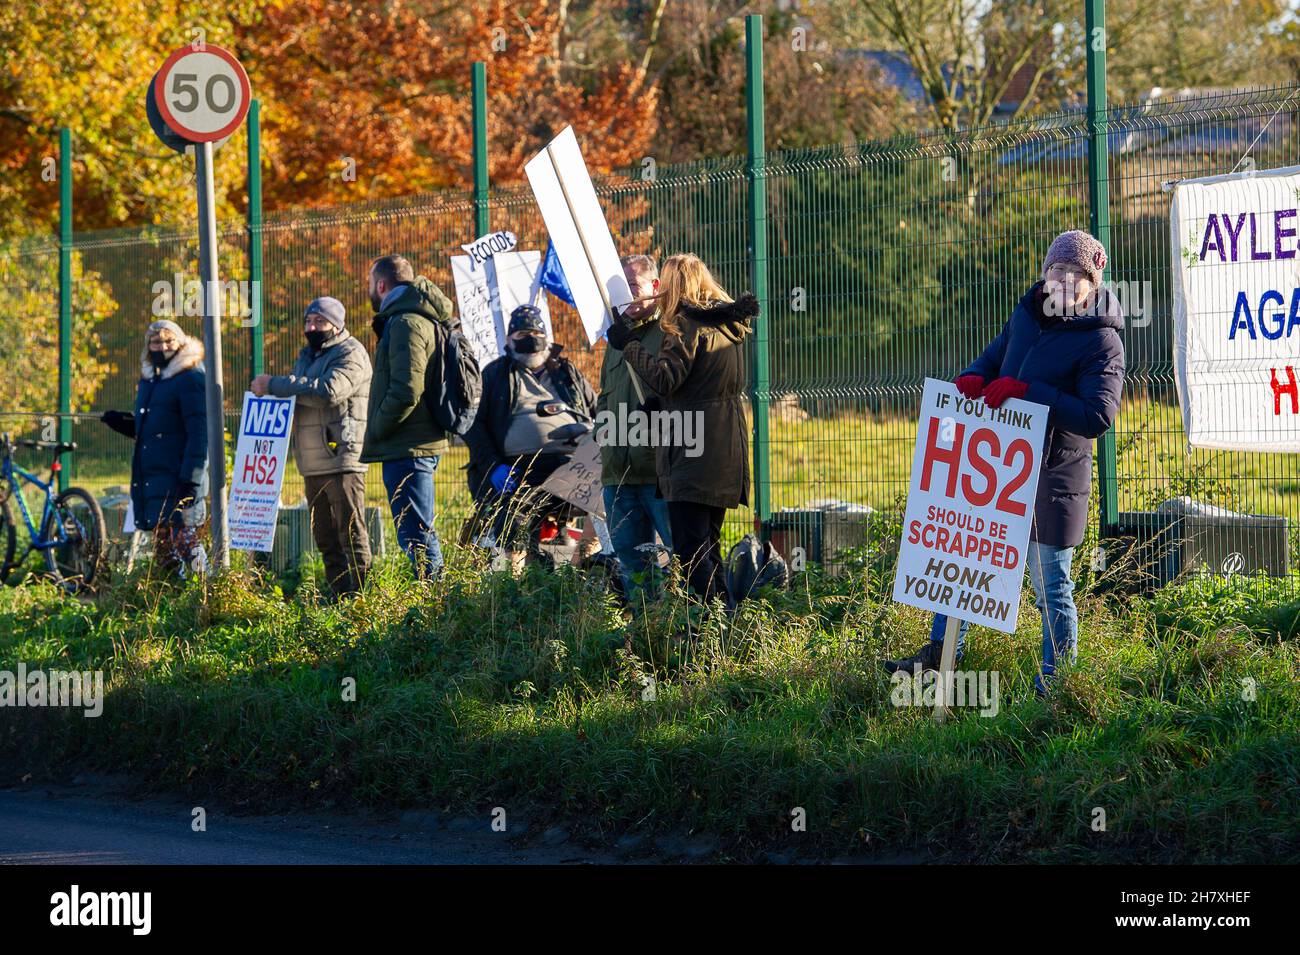 Aylesbury, Buckinghamshire, UK. 25th November, 2021. Anti HS2 protesters were protesting along the Oxford Road today in Aylesbury about HS2 allegedly committing wildlife crimes as HS2 have felled mature trees that they believe had hibernating bats roosting in them. Although the Eastern Leg of the HS2 High Speed Rail has been cancelled by Boris Johnson, HS2 Ltd are continuing with their construction of Phase 1 of the HS2 High Speed Rail from London to Birmingham which is destroying swathes of the Chilterns, an Area of Outstanding Natural Beauty. Credit: Maureen McLean/Alamy Live News Stock Photo